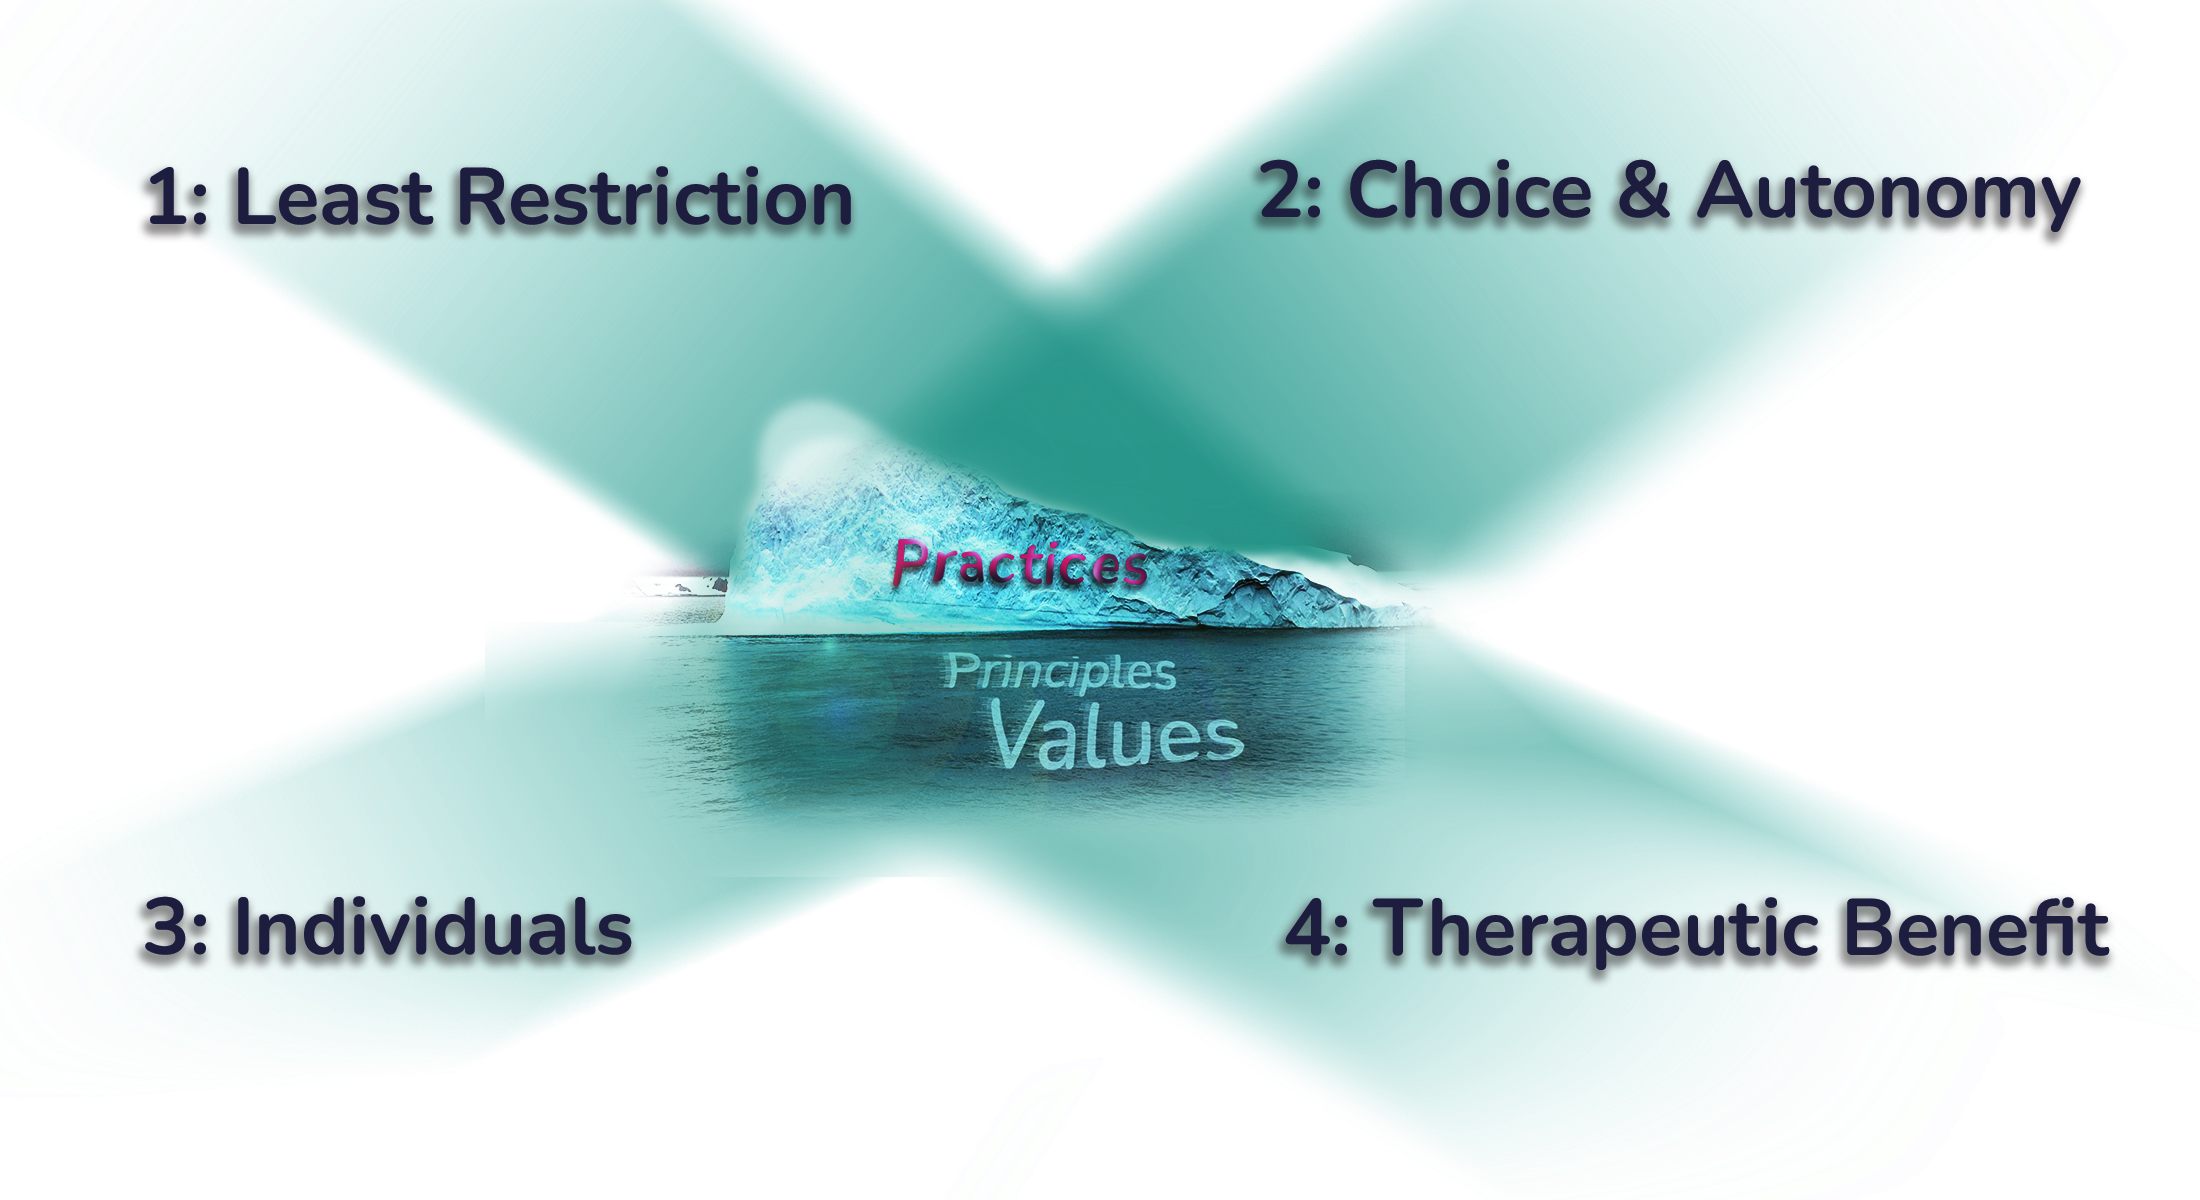 Iceberg with 'Practices' showing above water and 'Principles' and 'Values' underwater